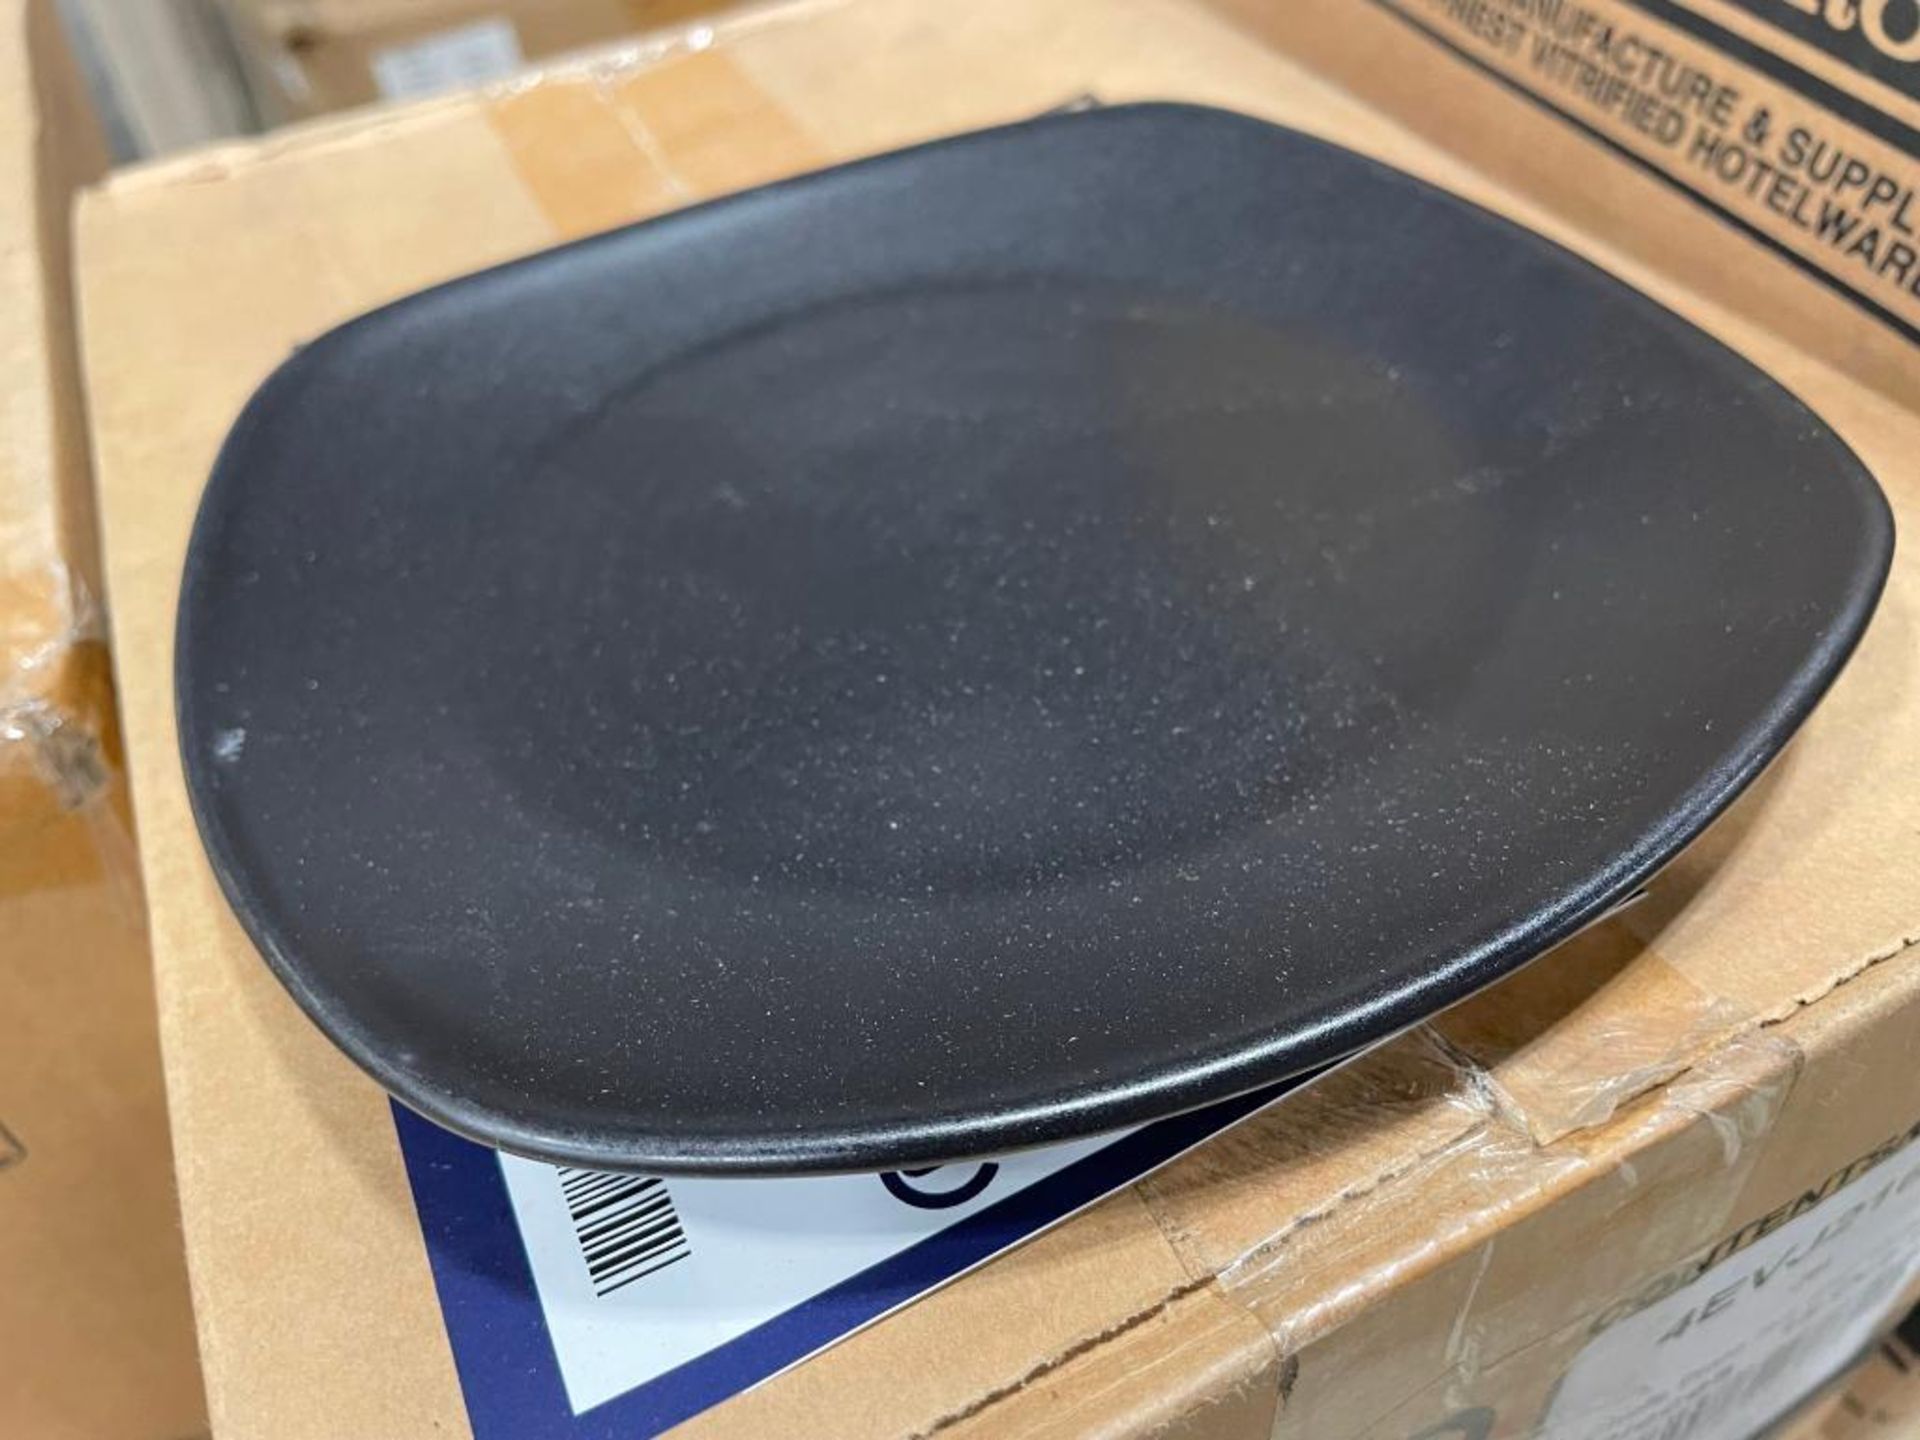 3 CASES OF DUDSON EVO JET SQUARE CHEF'S PLATES 6.5" - 36/CASE - MADE IN ENGLAND - Image 5 of 5